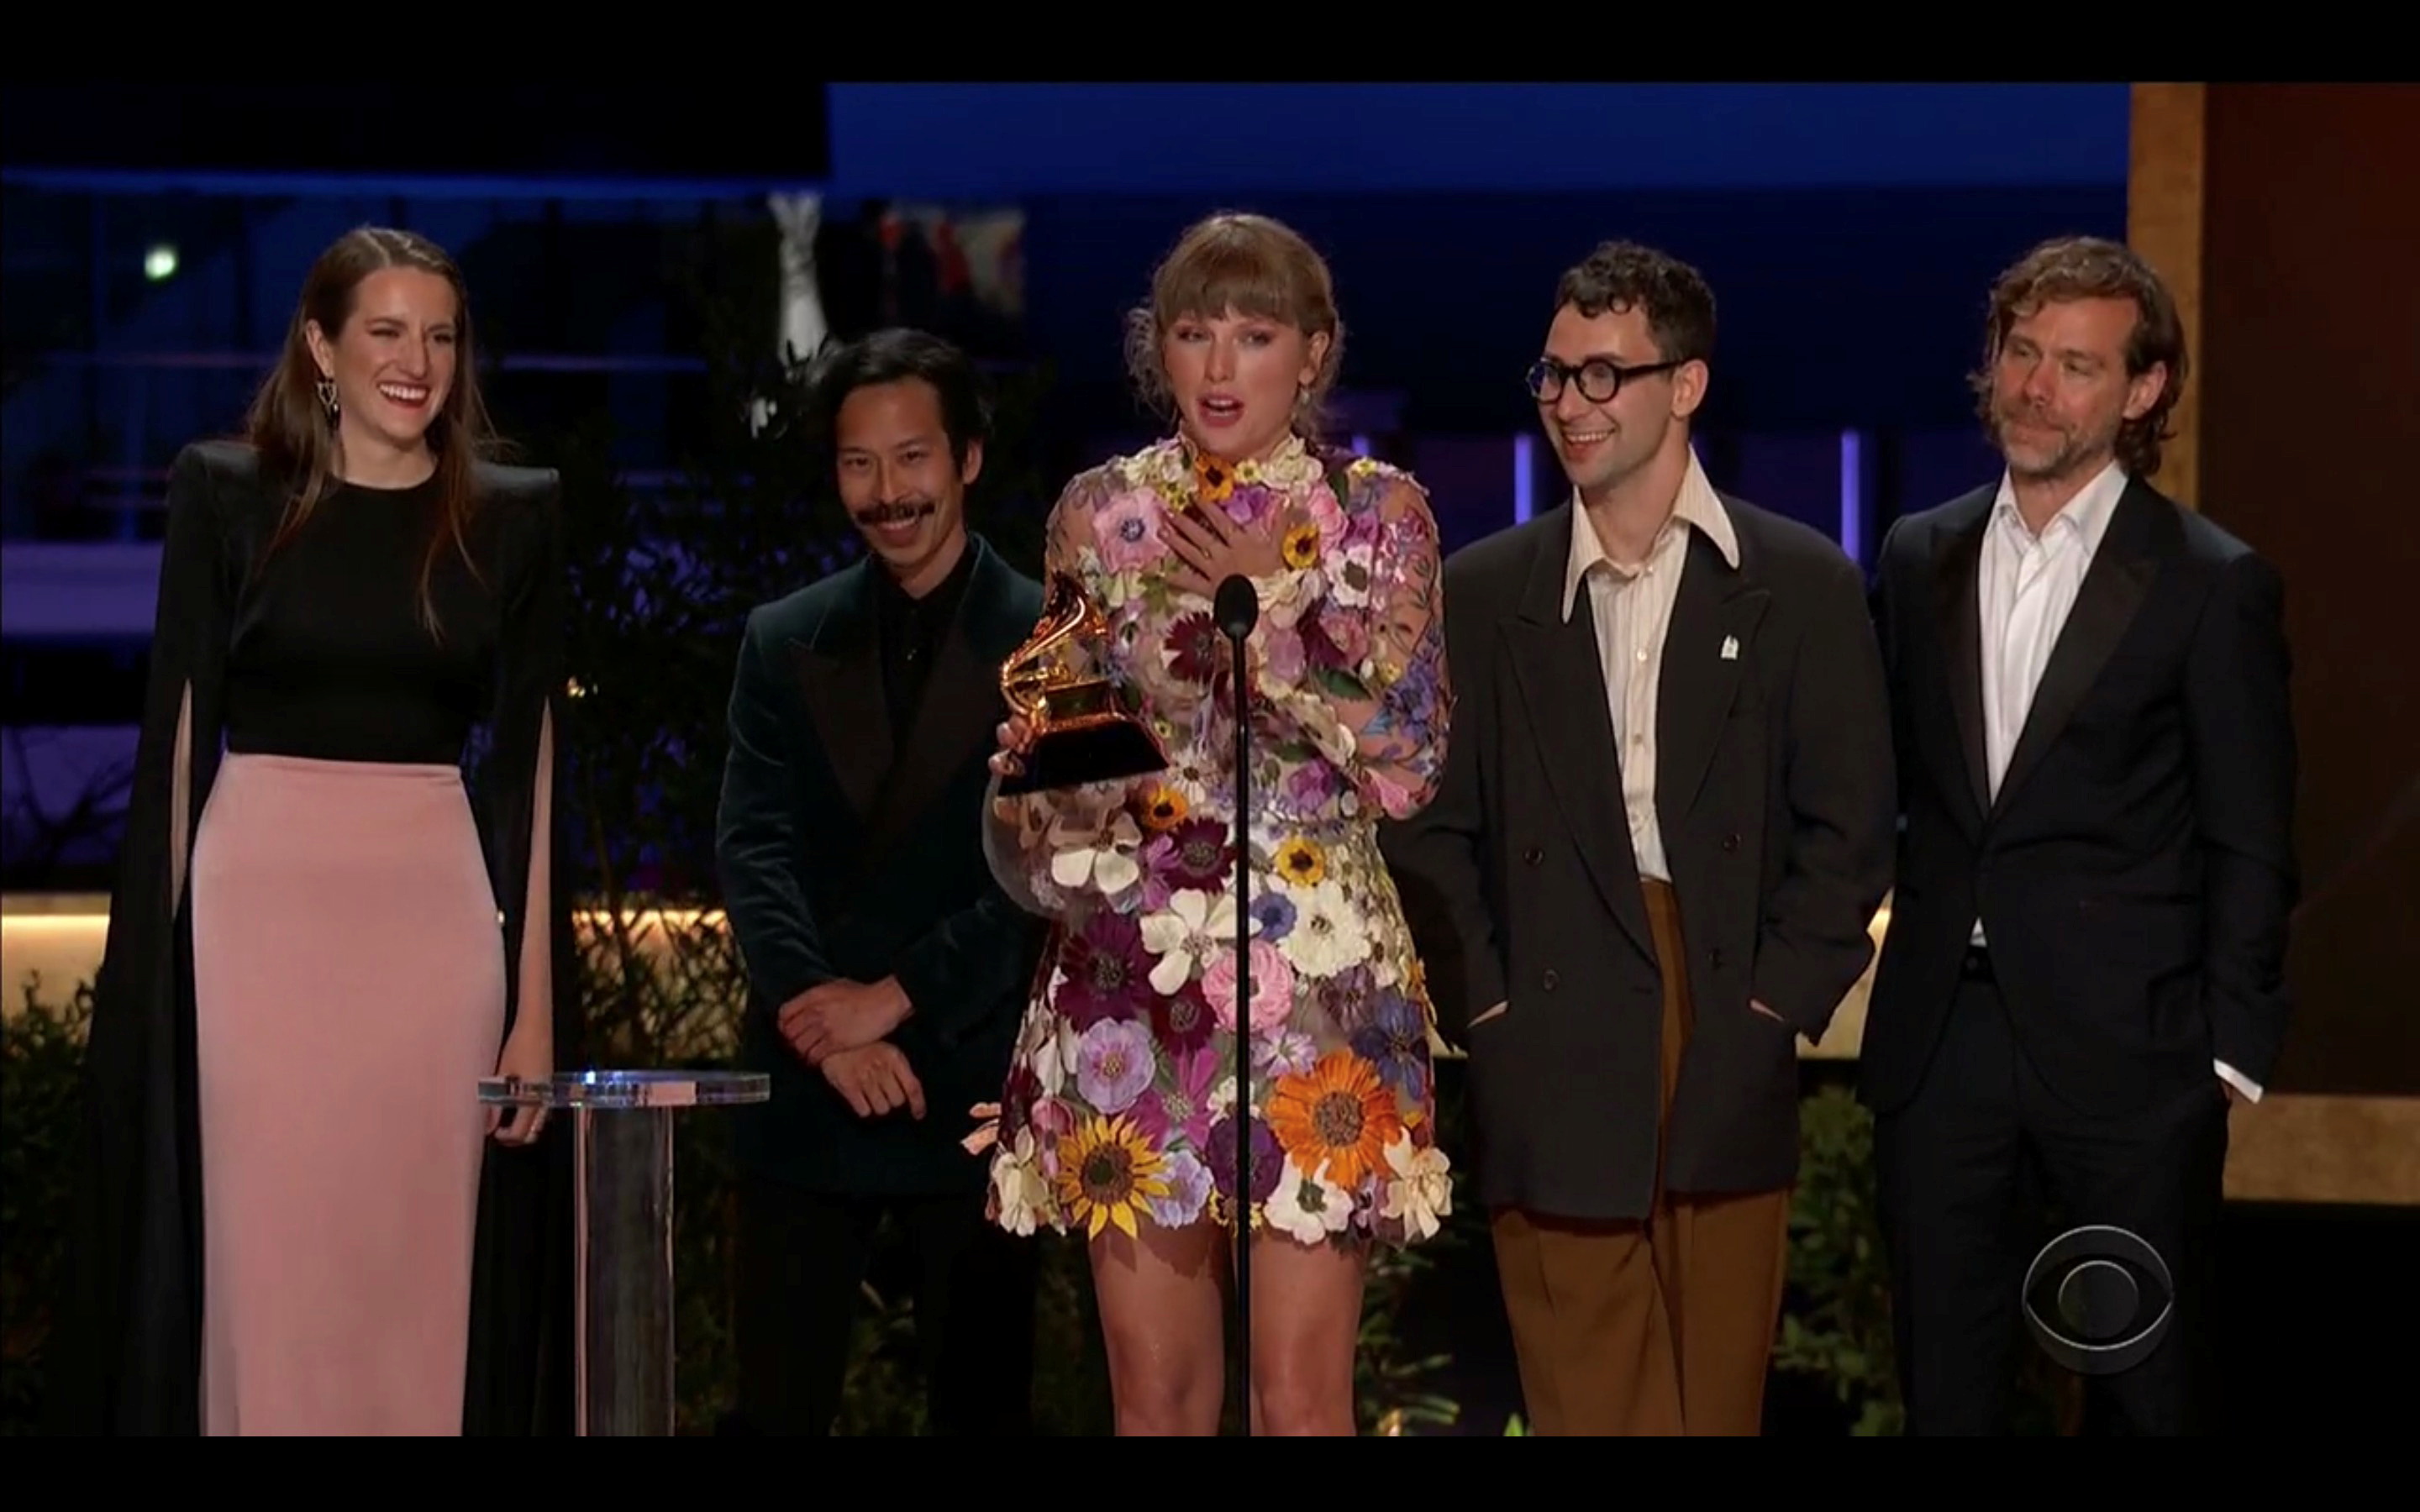 Taylor Swift wins the Grammy for Album of the Year for "Folklore" in this screen grab taken from video of the 63rd Annual Grammy Awards in Los Angeles, California, U.S., March 14, 2021. CBS/Handout via REUTERS - ATTENTION EDITORS - THIS IMAGE HAS BEEN SUPPLIED BY A THIRD PARTY. NO ARCHIVES, NO SALES, MANDATORY CREDIT, NO NEW USES AFTER 0400 GMT 17/3/2021, NO BROADCAST USE, USE FOR GRAMMY RELATED COVERAGE ONLY